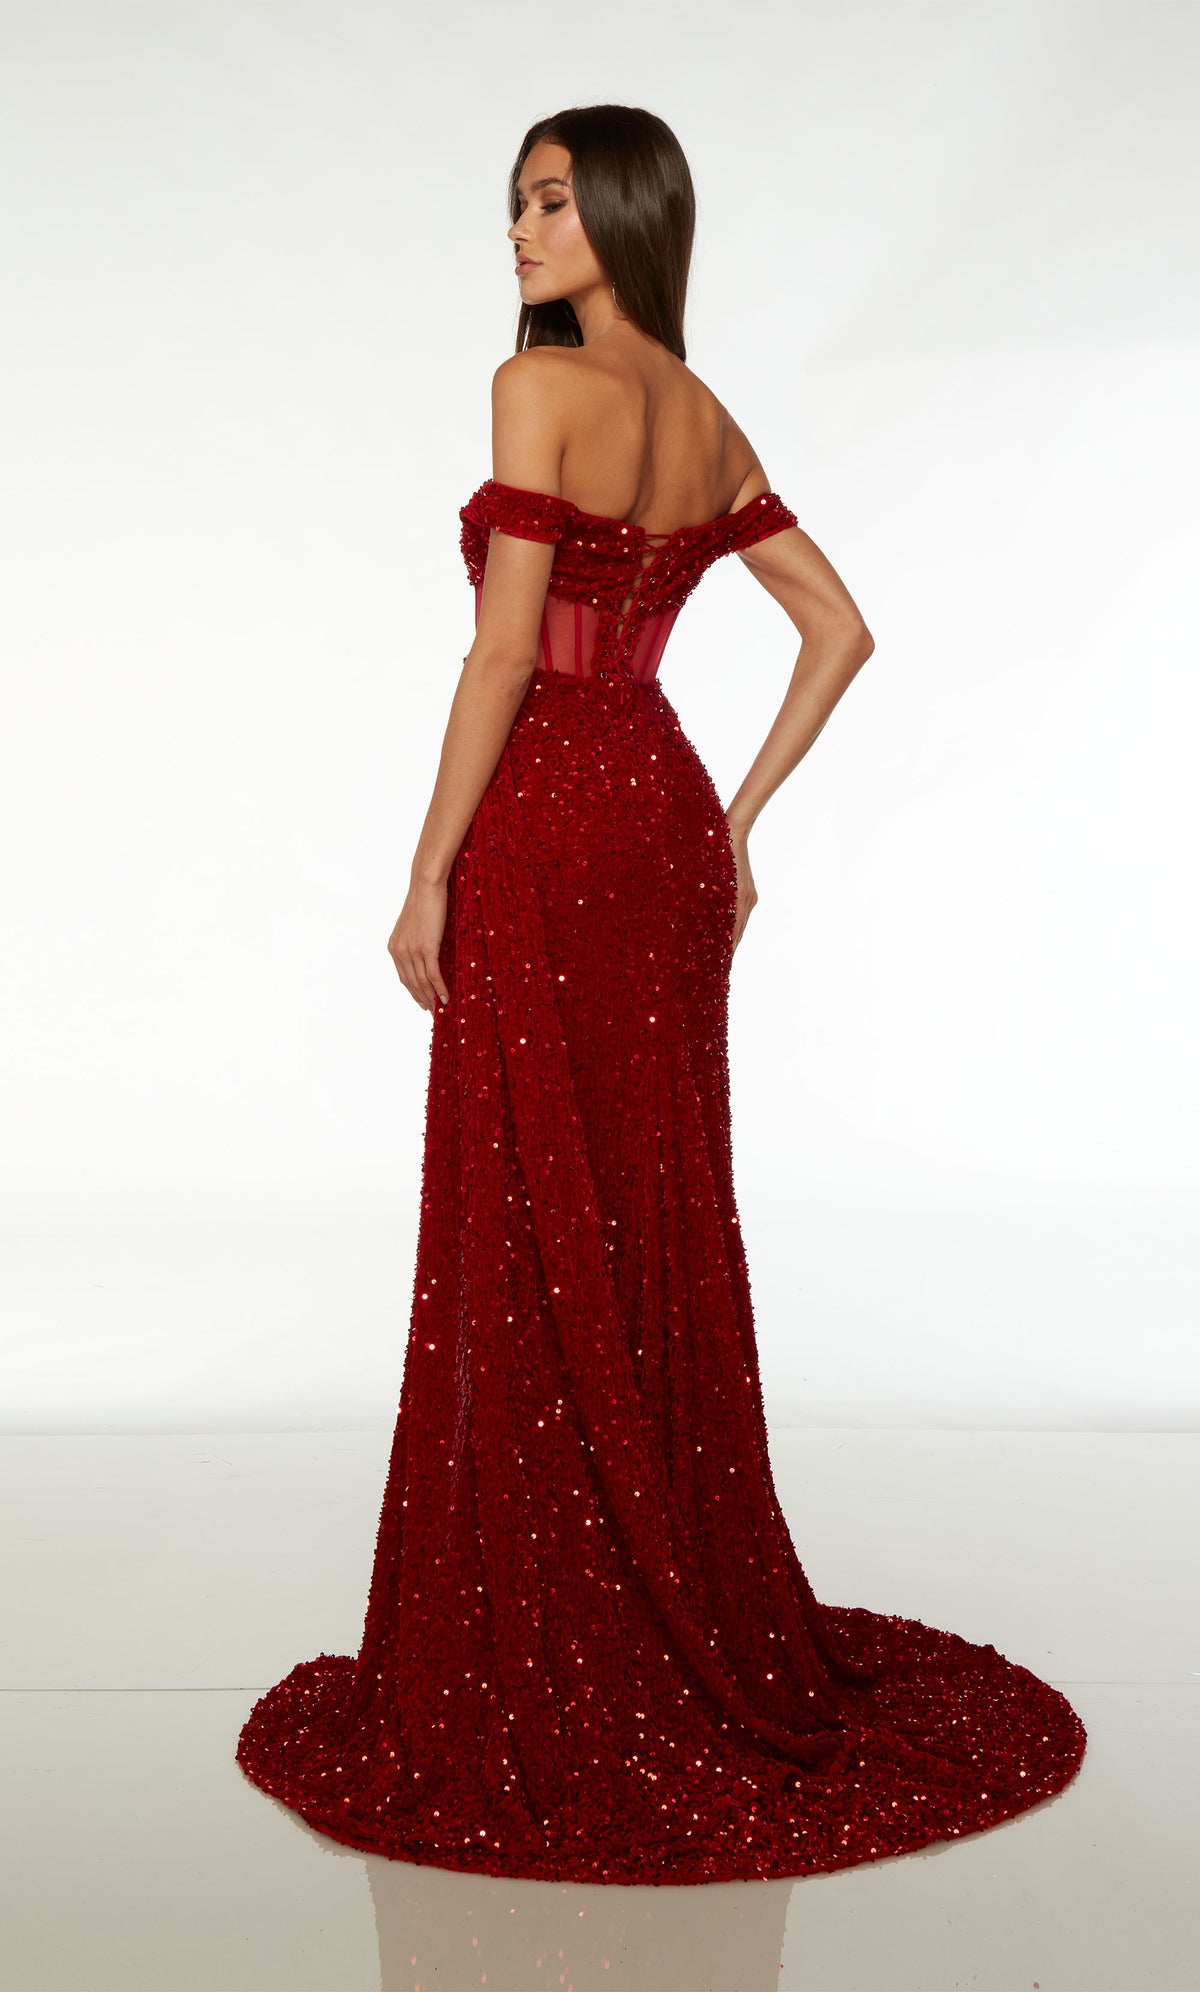 Striking red prom dress: Off-the-shoulder sheer corset top, side slit with beaded fringe, train, and detachable side train for an dramatic and glamorous look.